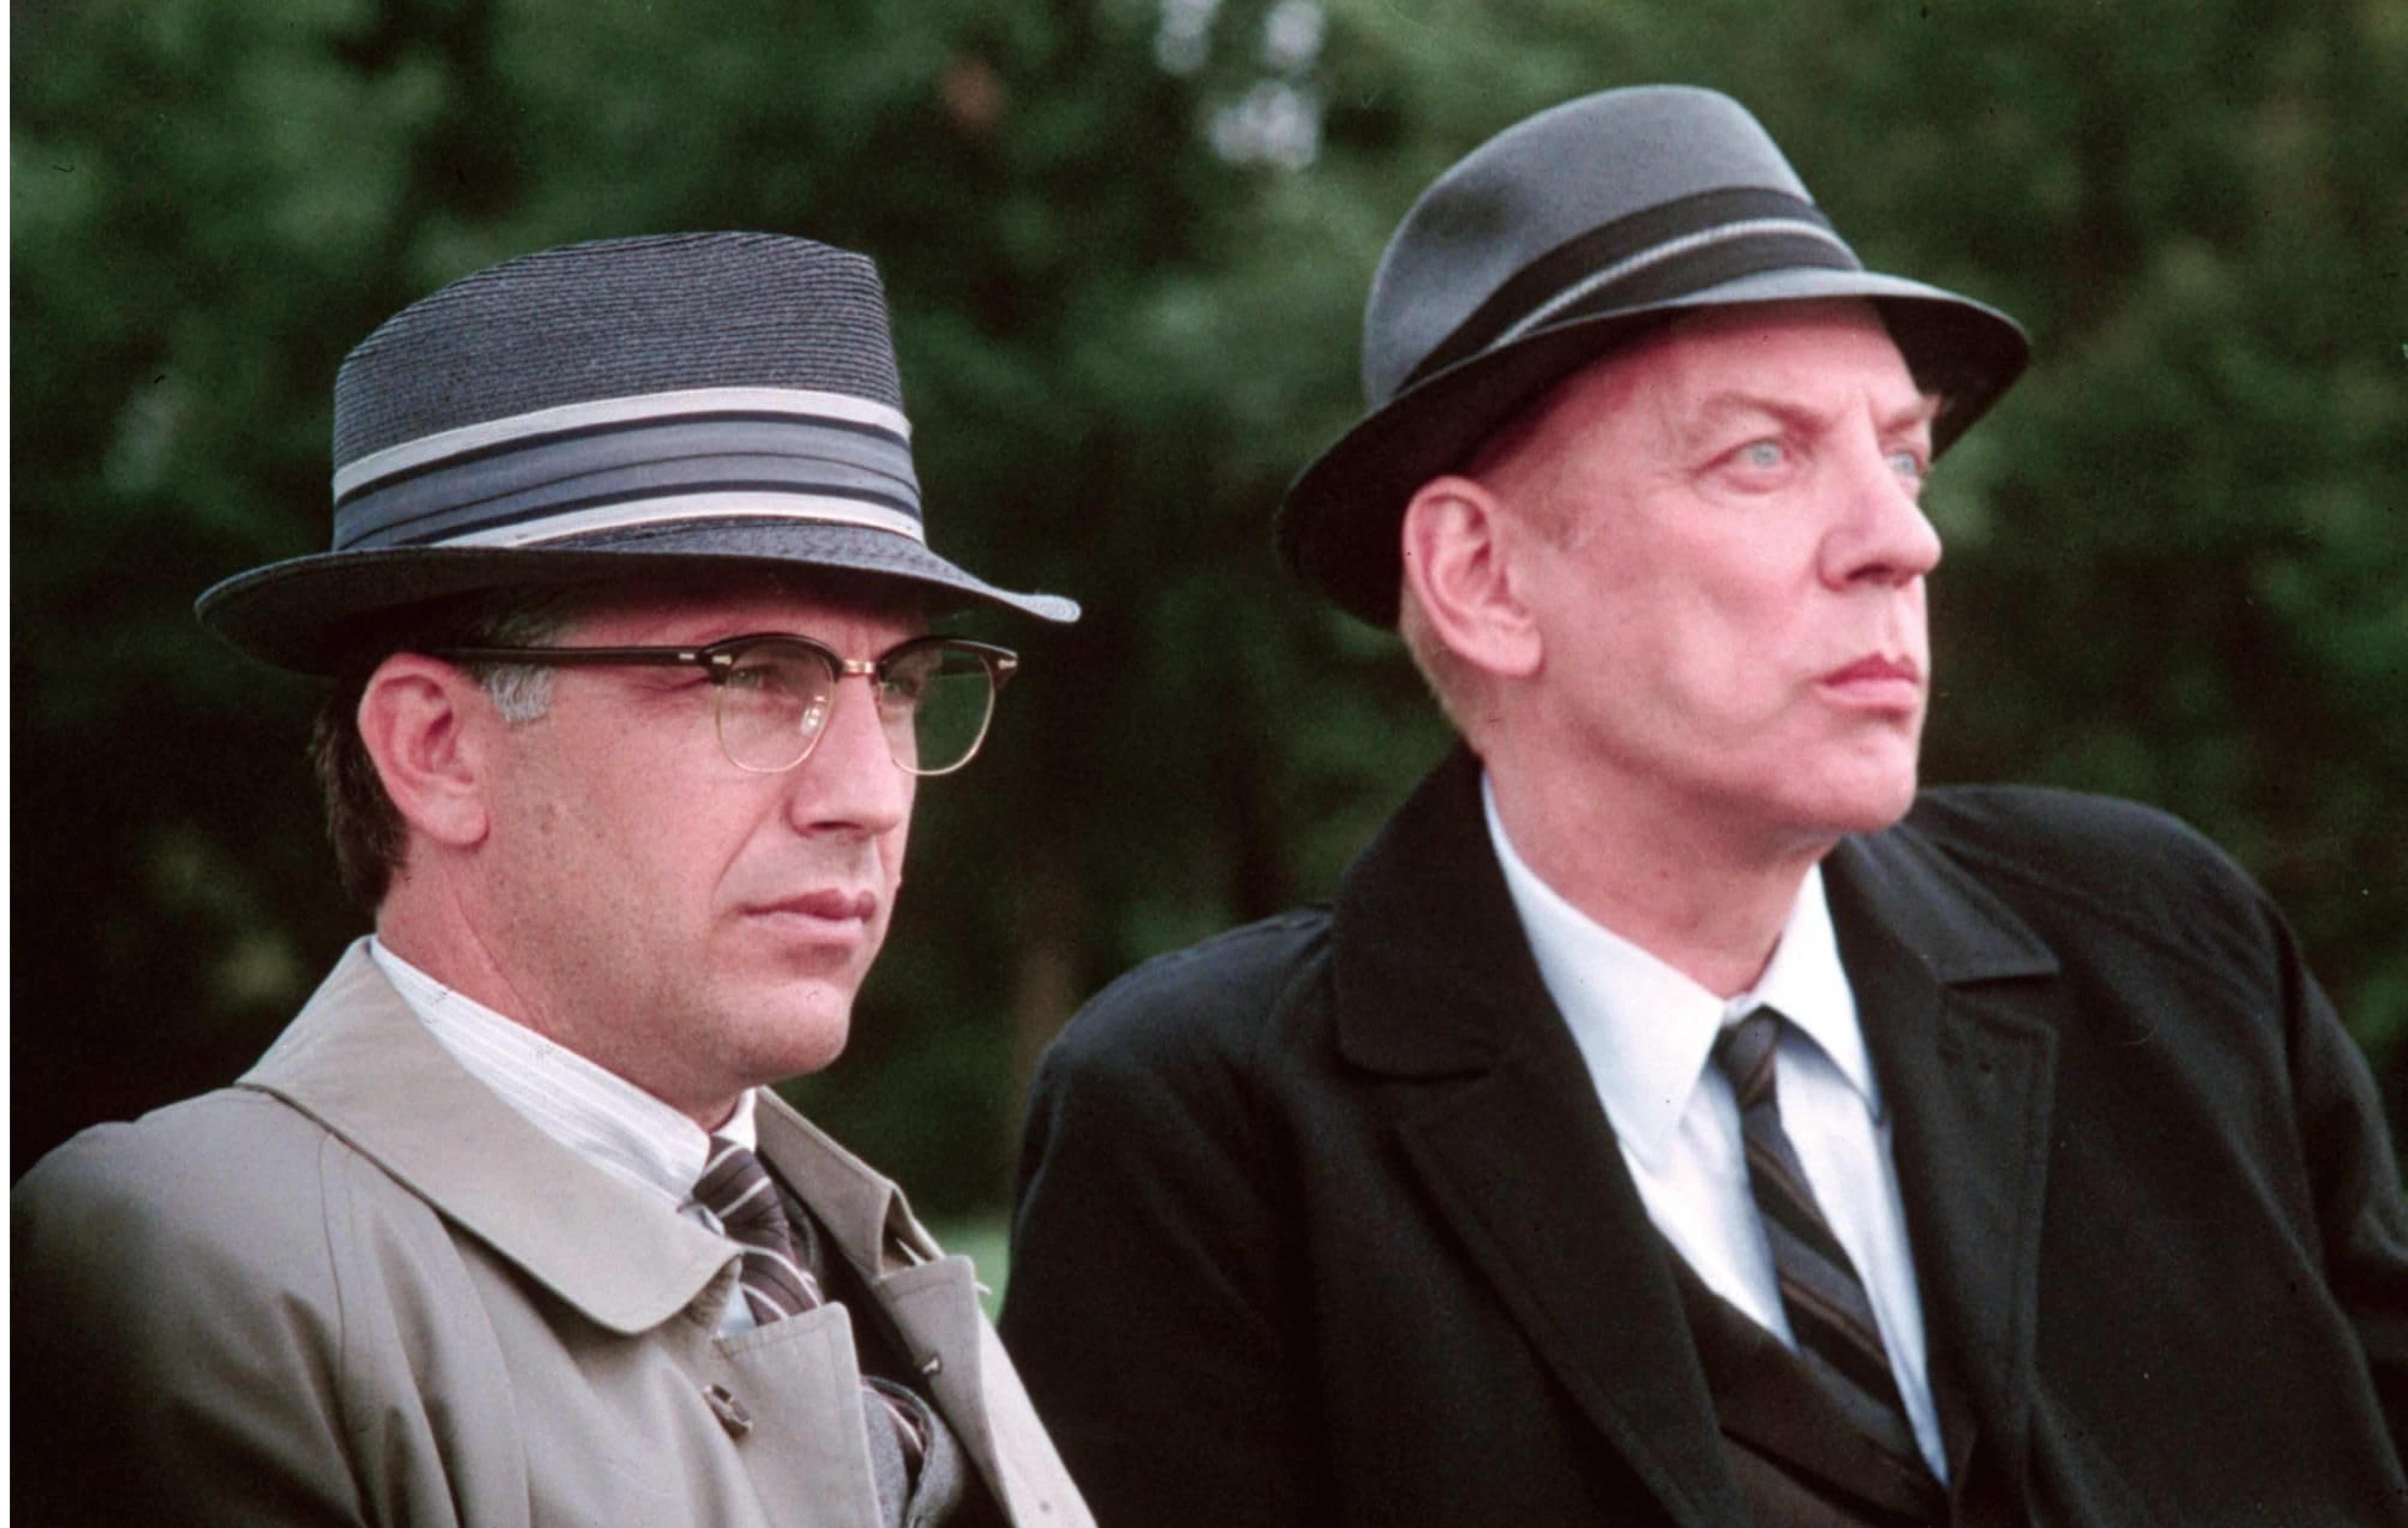 Kevin Coster and Donald Sutherland in the 1991 film JFK sitting on a bench with suit and hats on